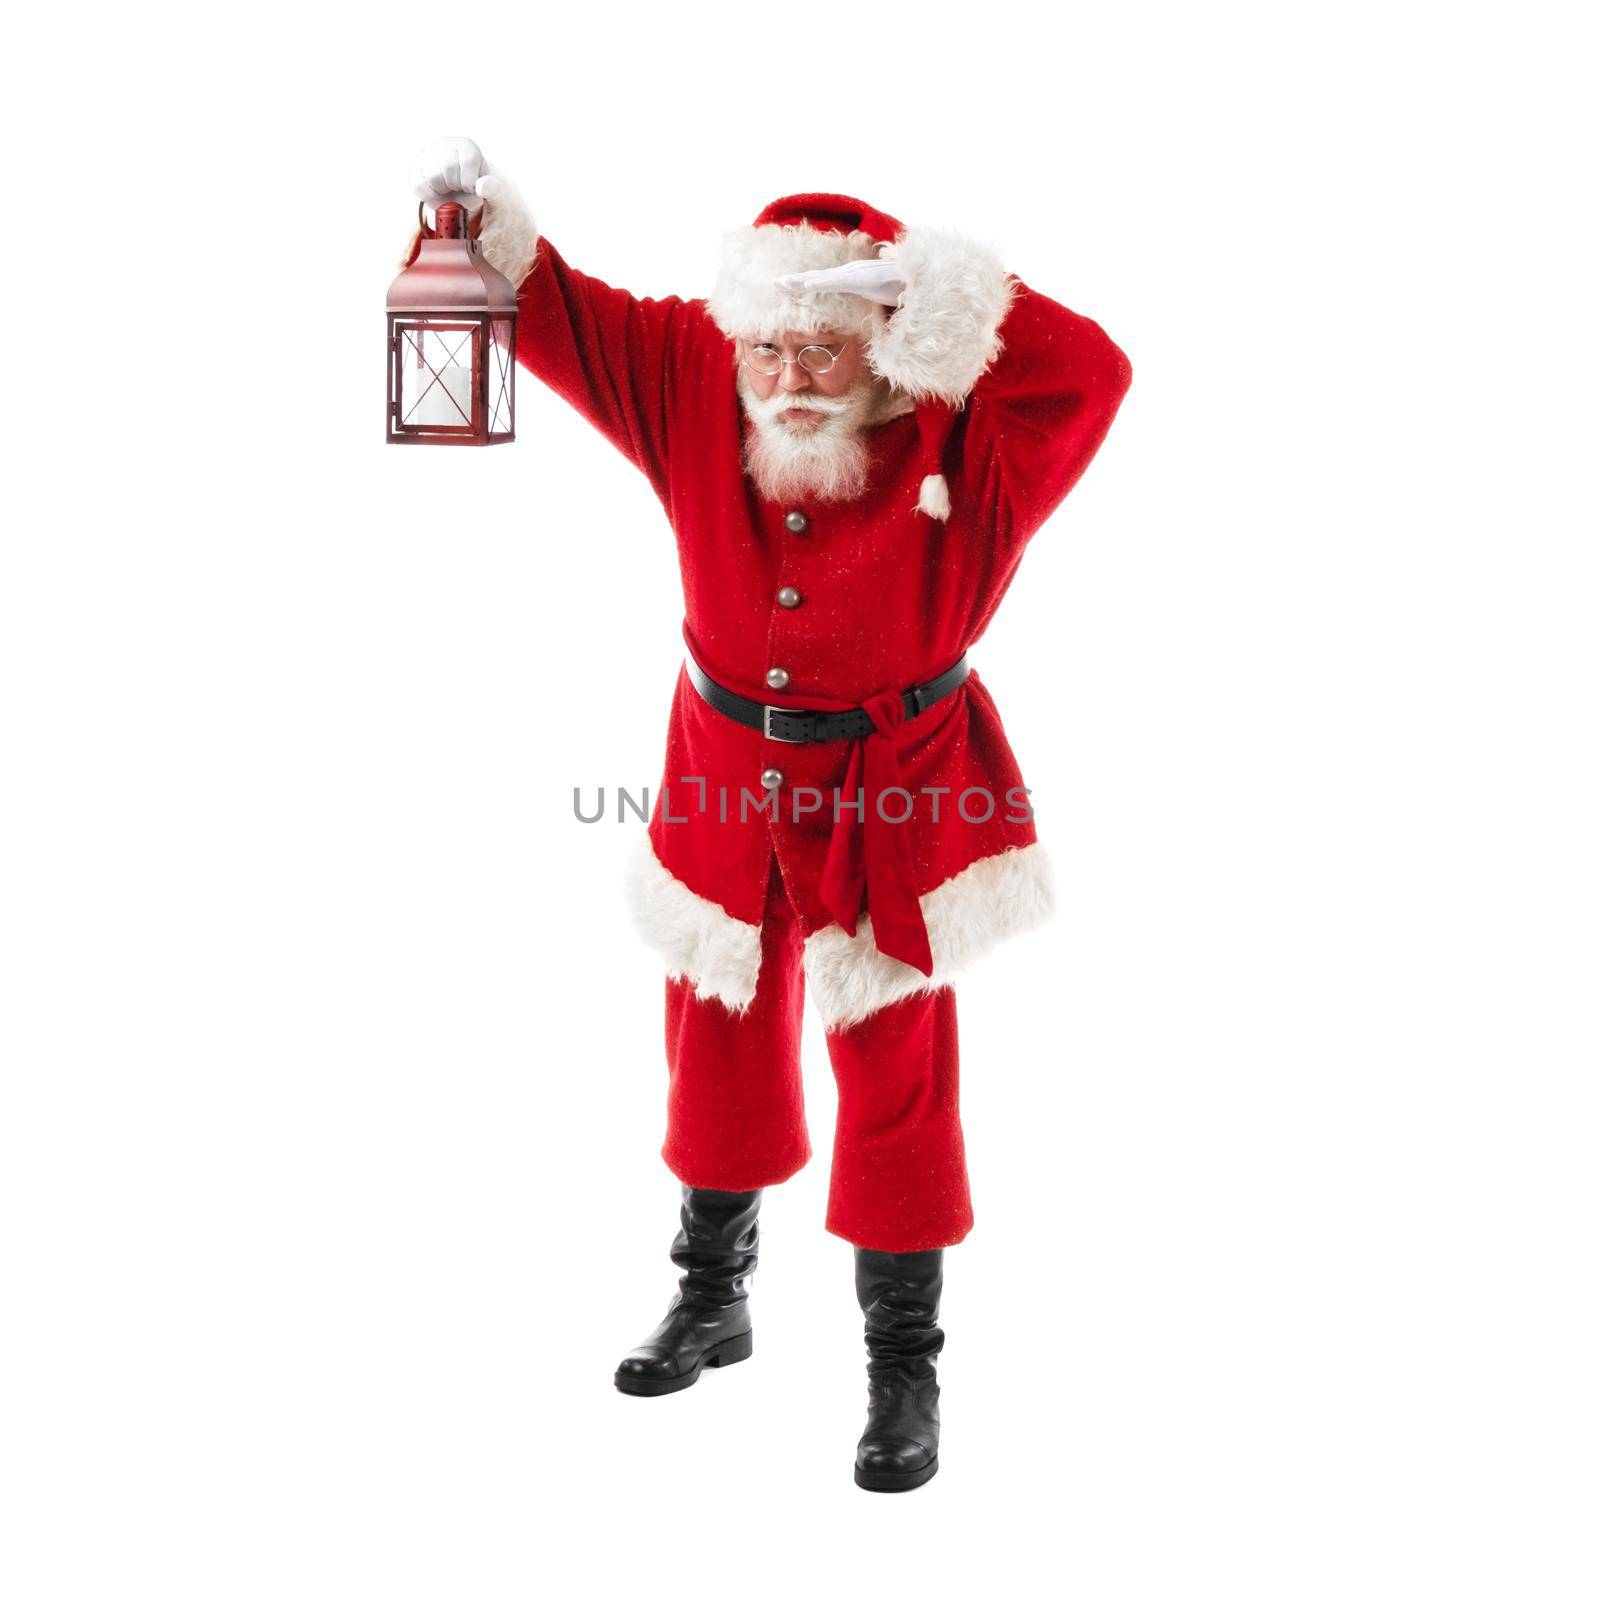 Santa Claus with lantern isolated over white background